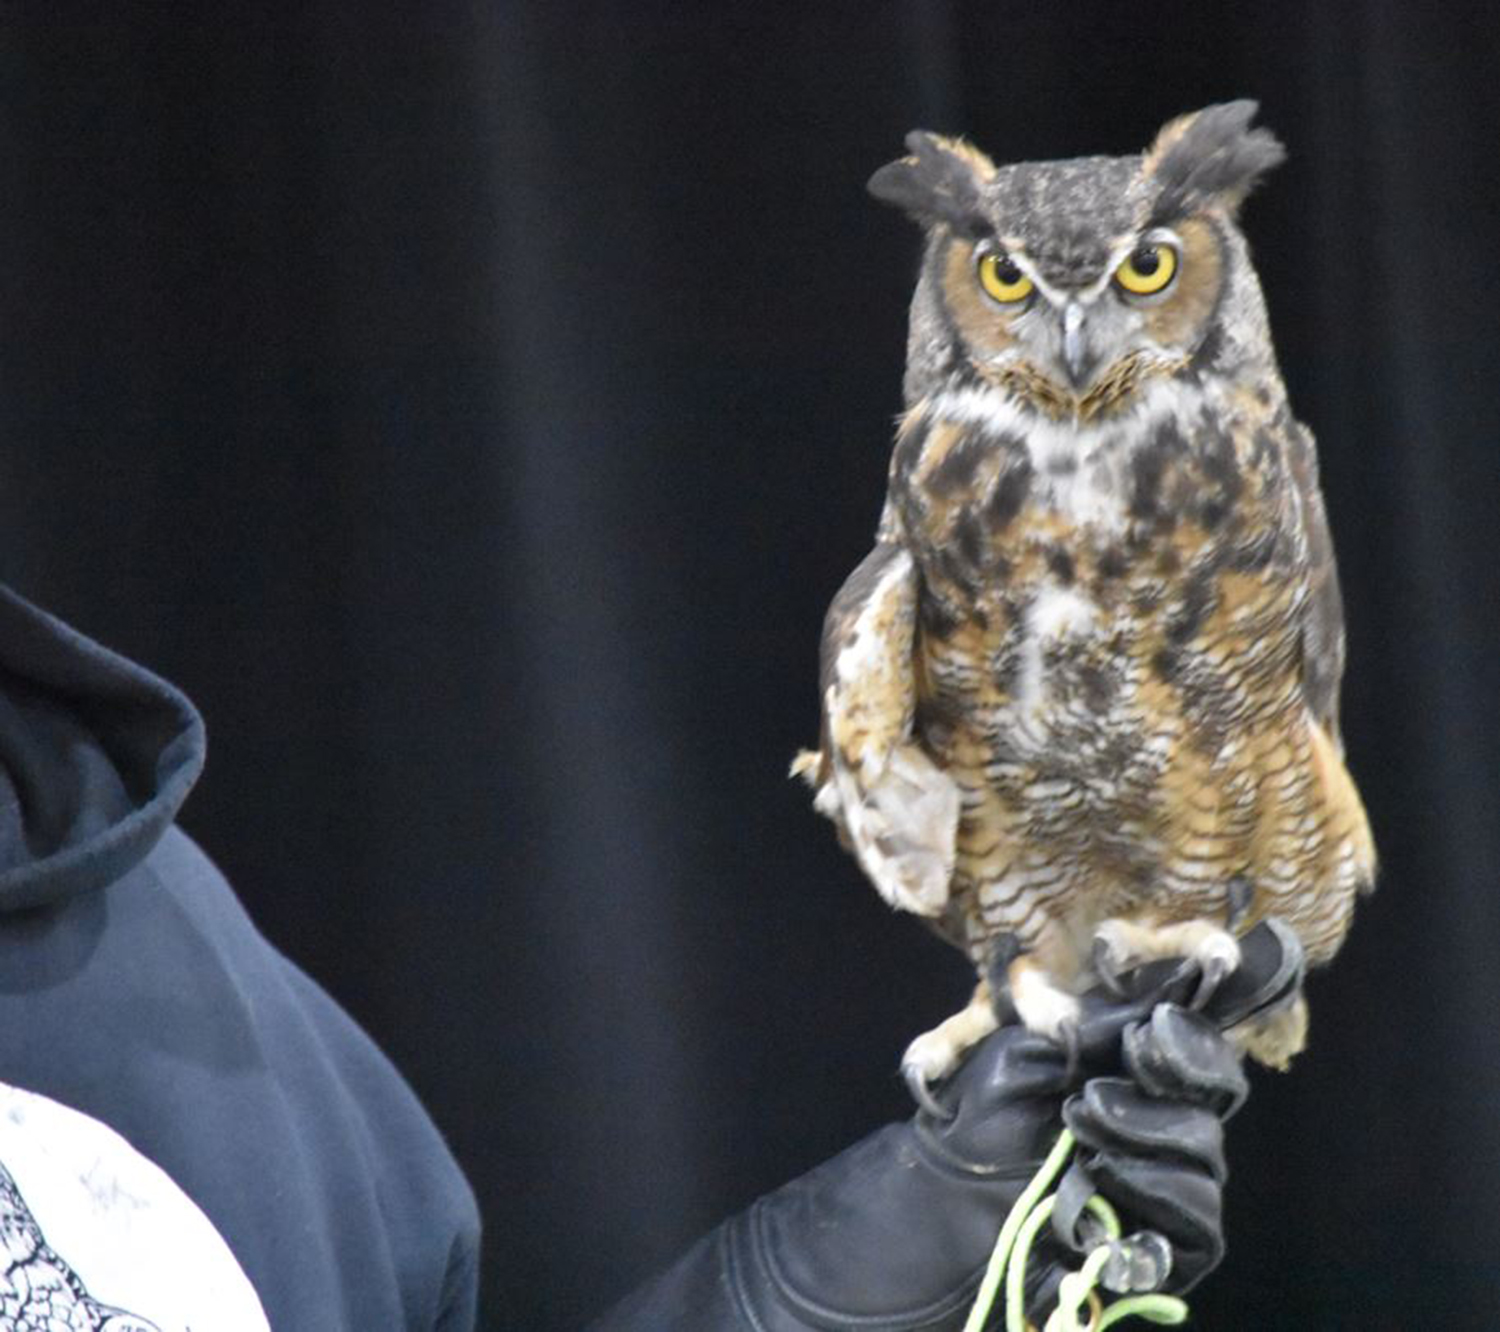 Celebrating A Regional Feathered Friend At Genesee Country Village & Museum’s “Owl Moon” Event